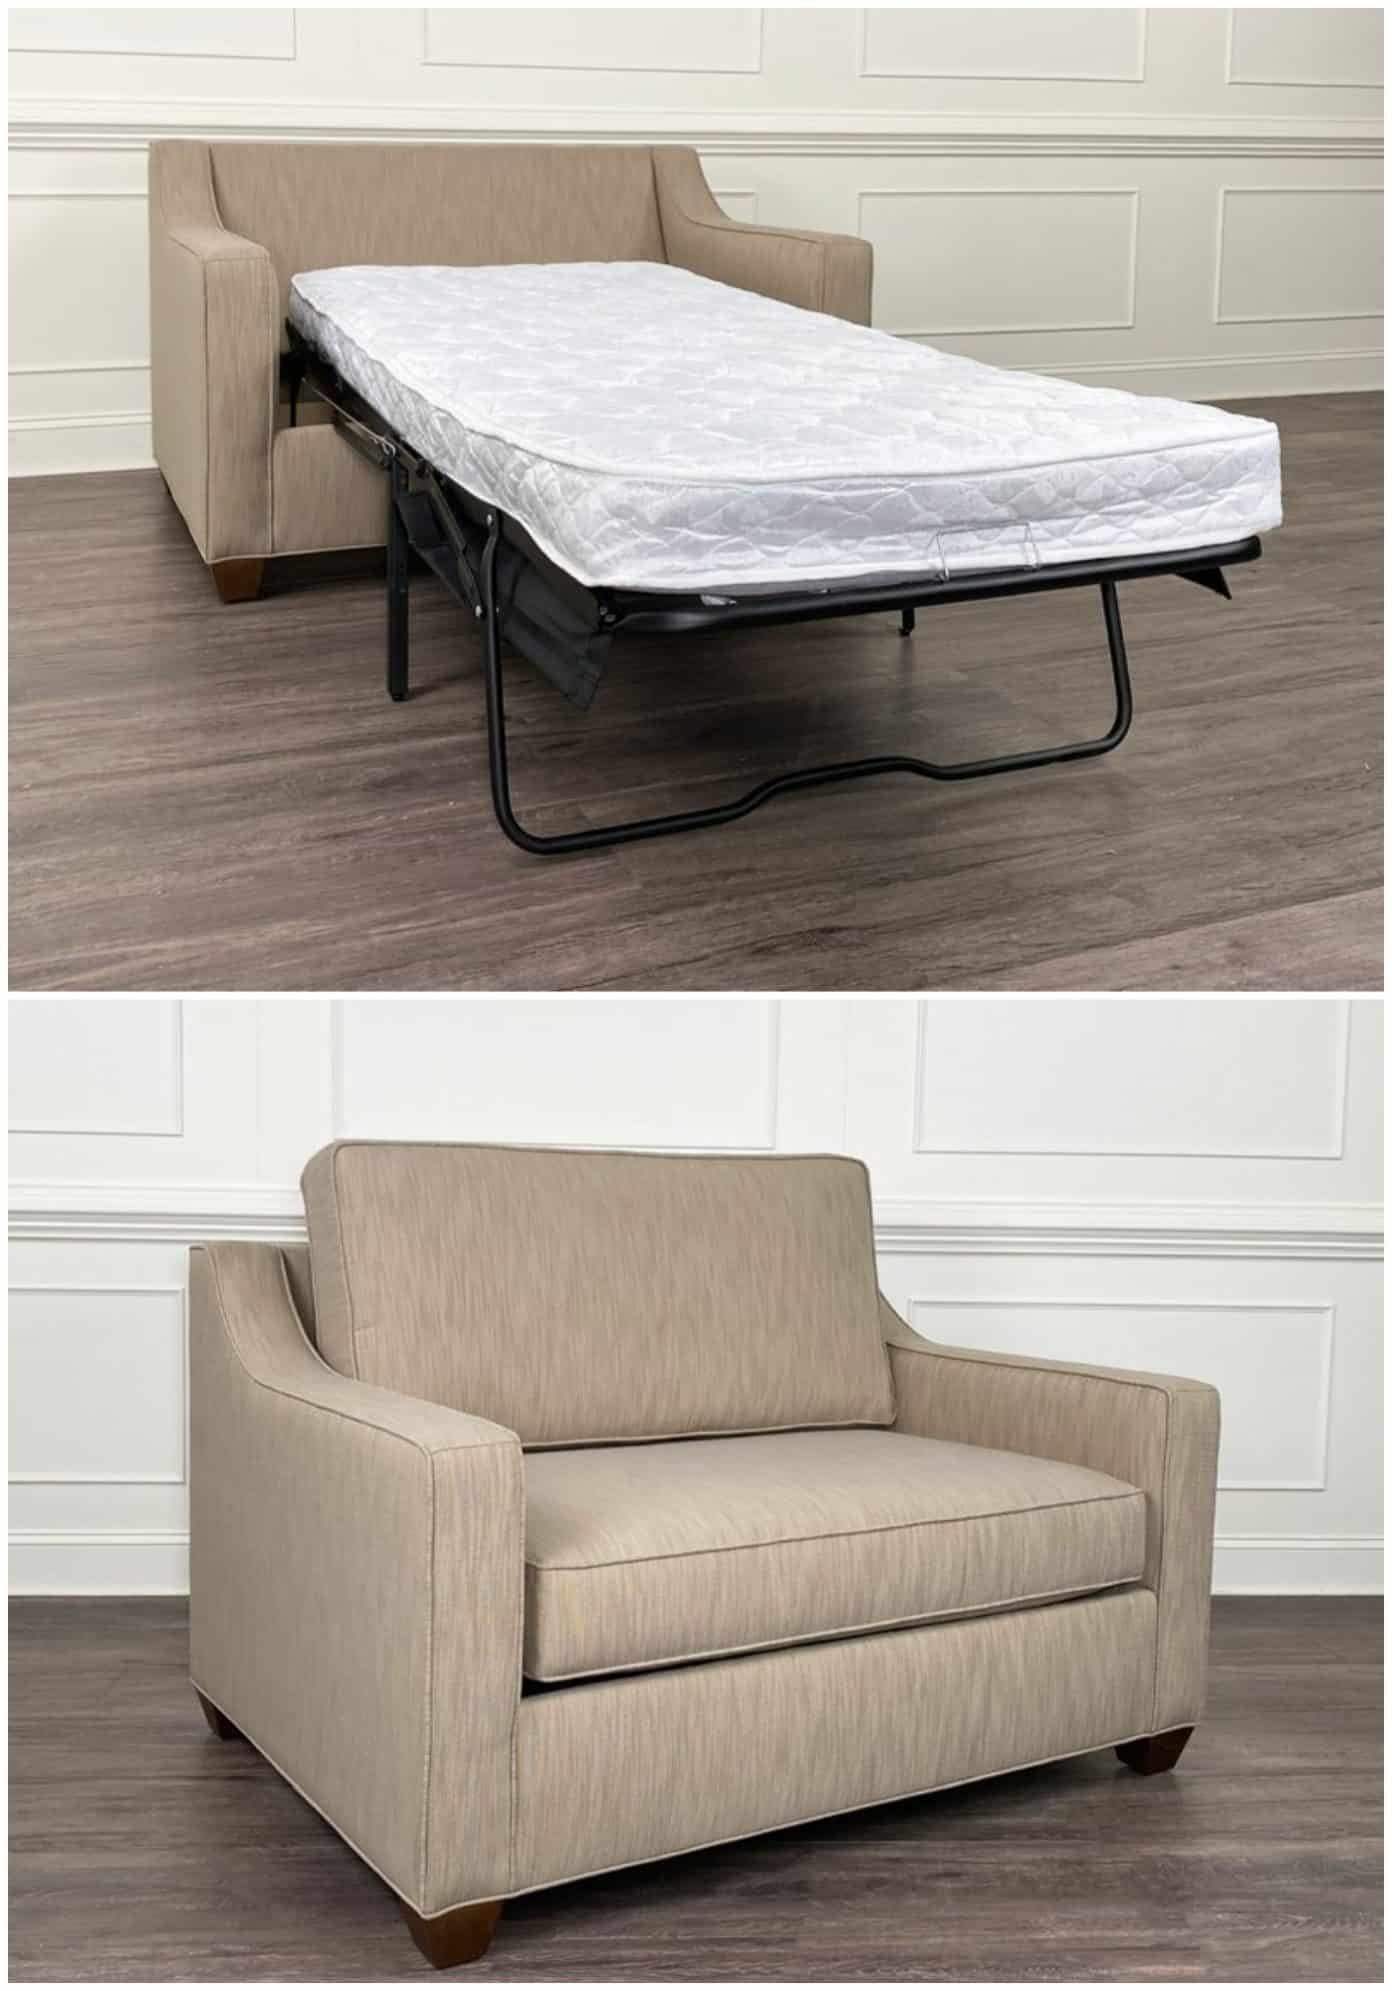 12 Convertible Chair Beds That Go From Seating To Sleeping In Seconds In Convertible Light Gray Chair Beds (Gallery 11 of 20)